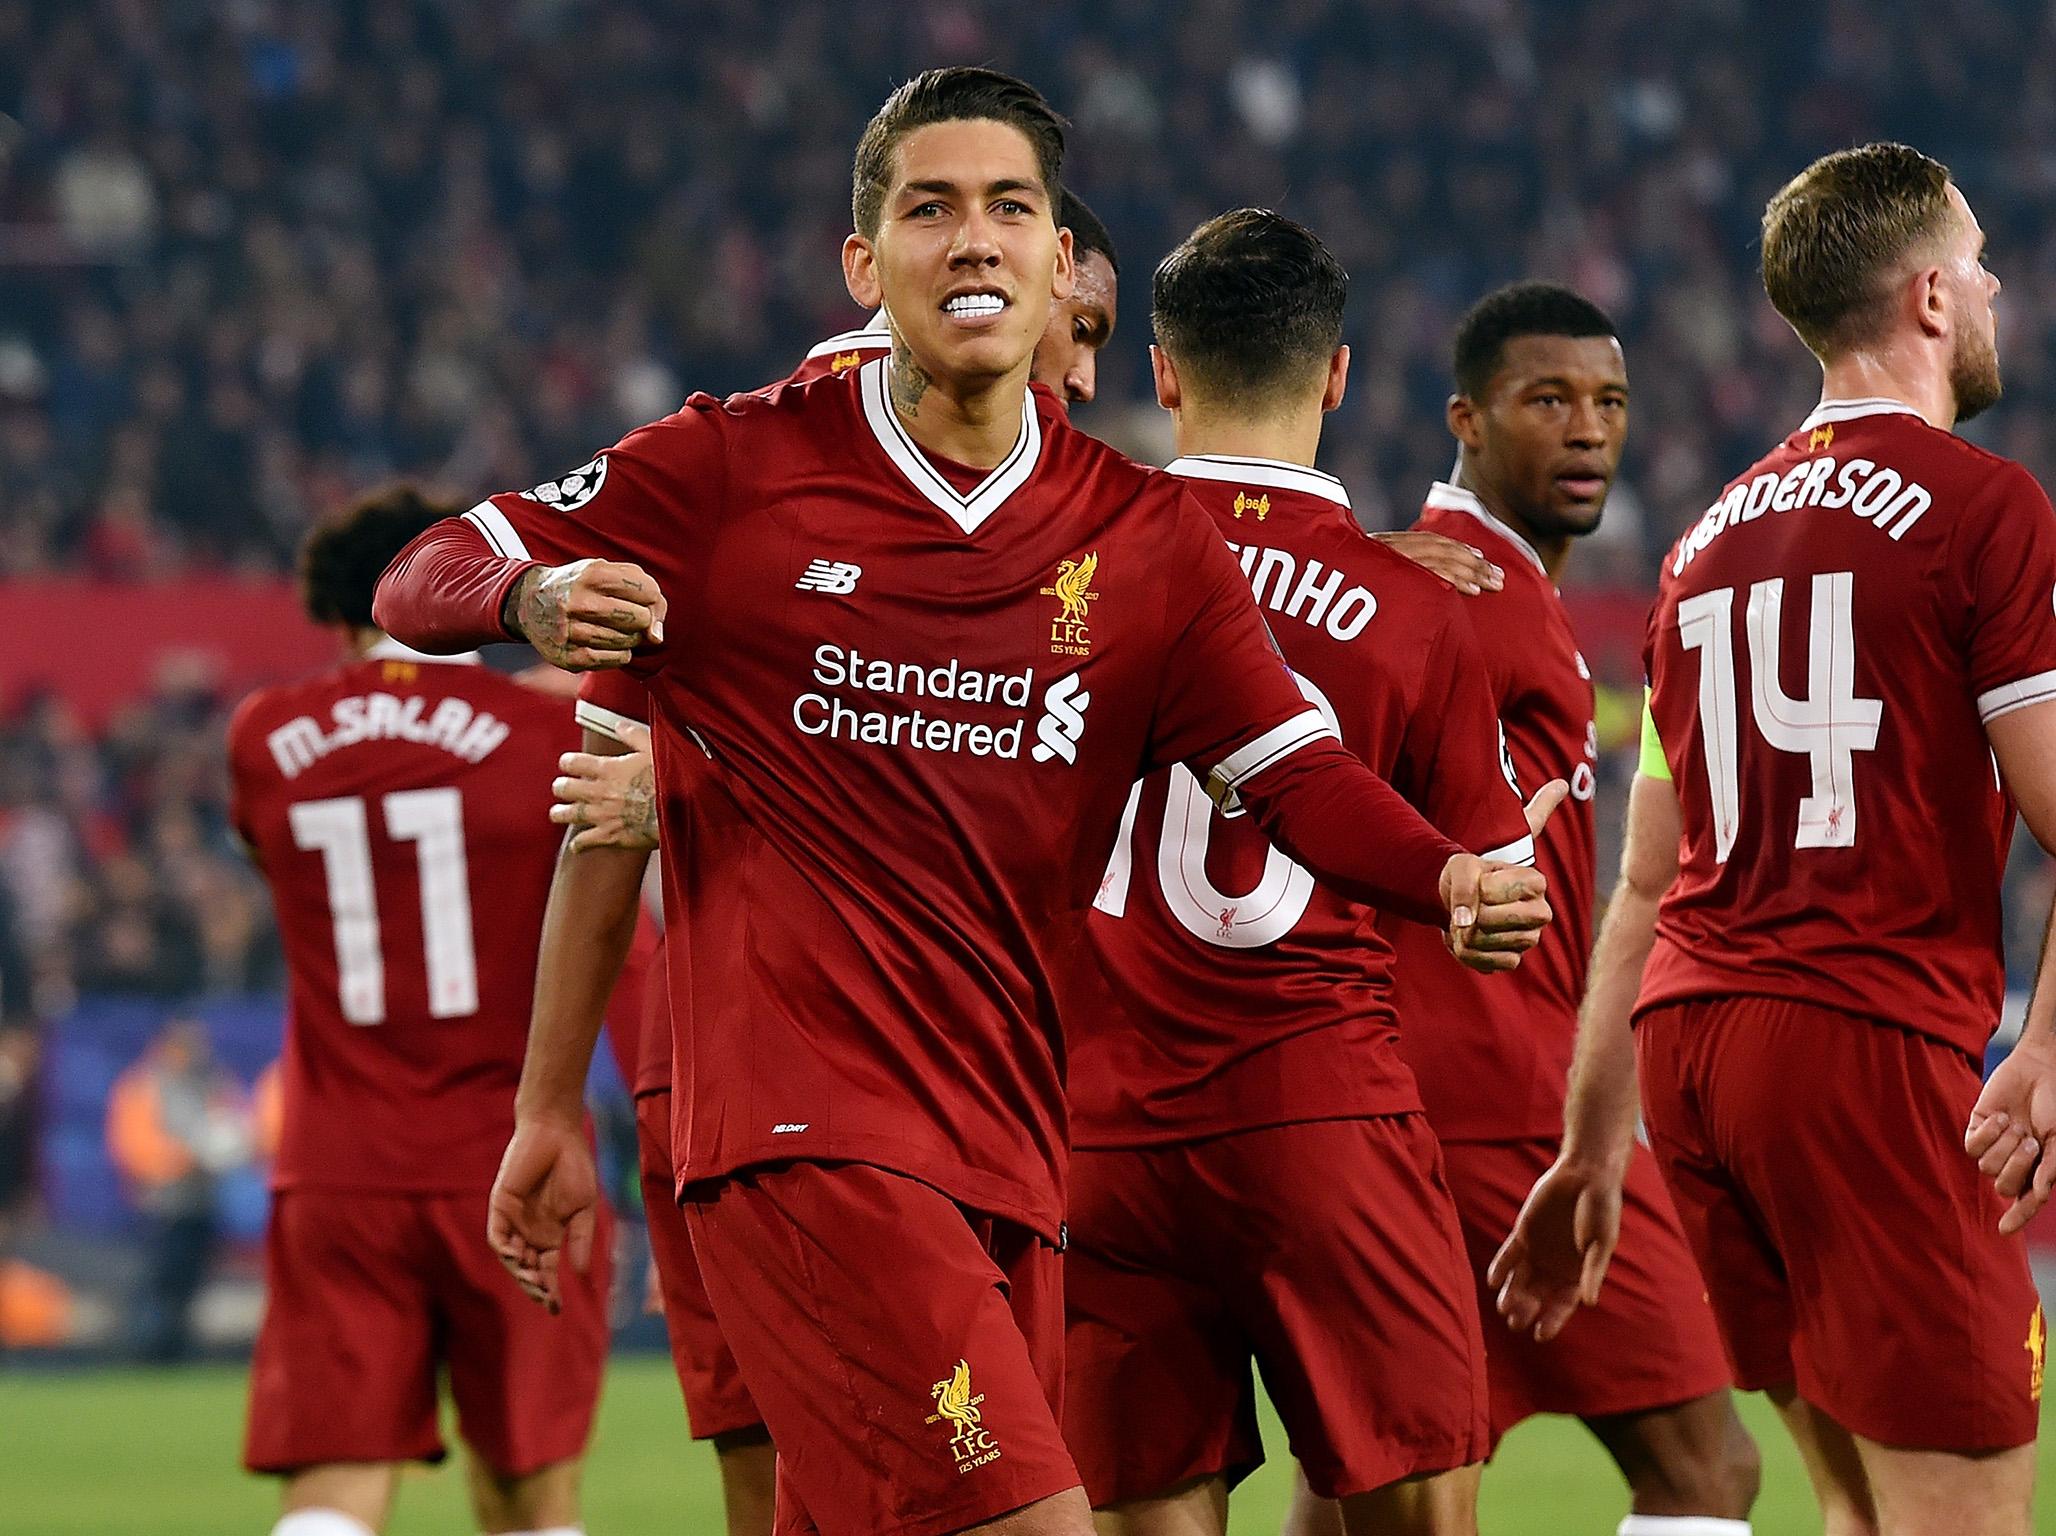 Liverpool were 3-0 up before Sevilla's remarkable comeback